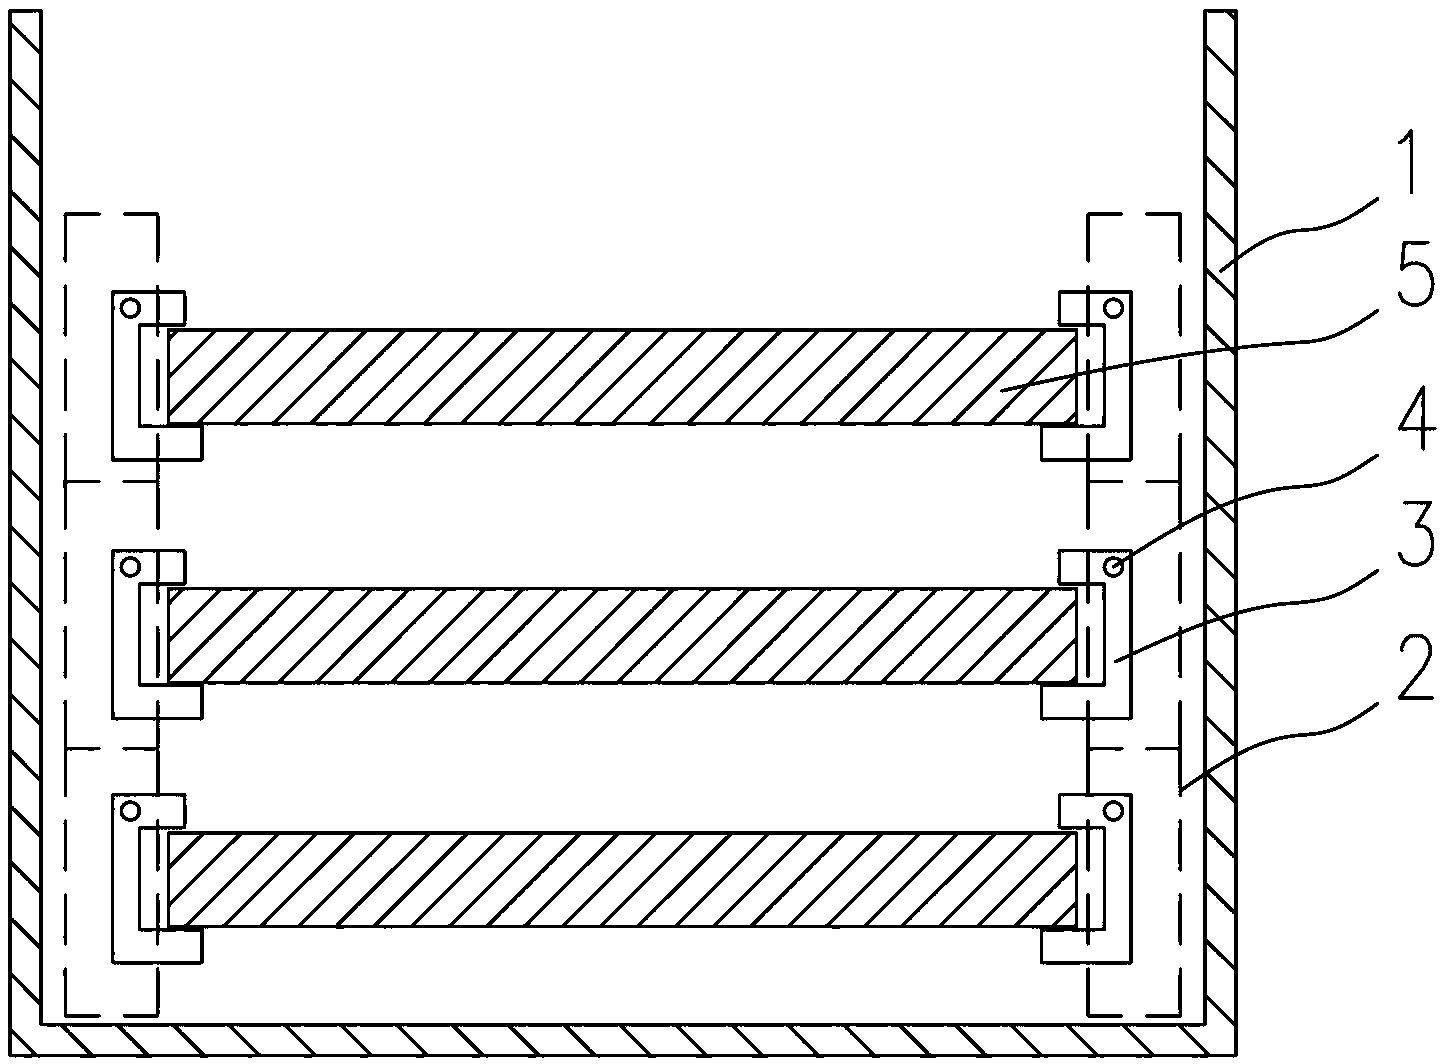 Packaging device for backlight modules